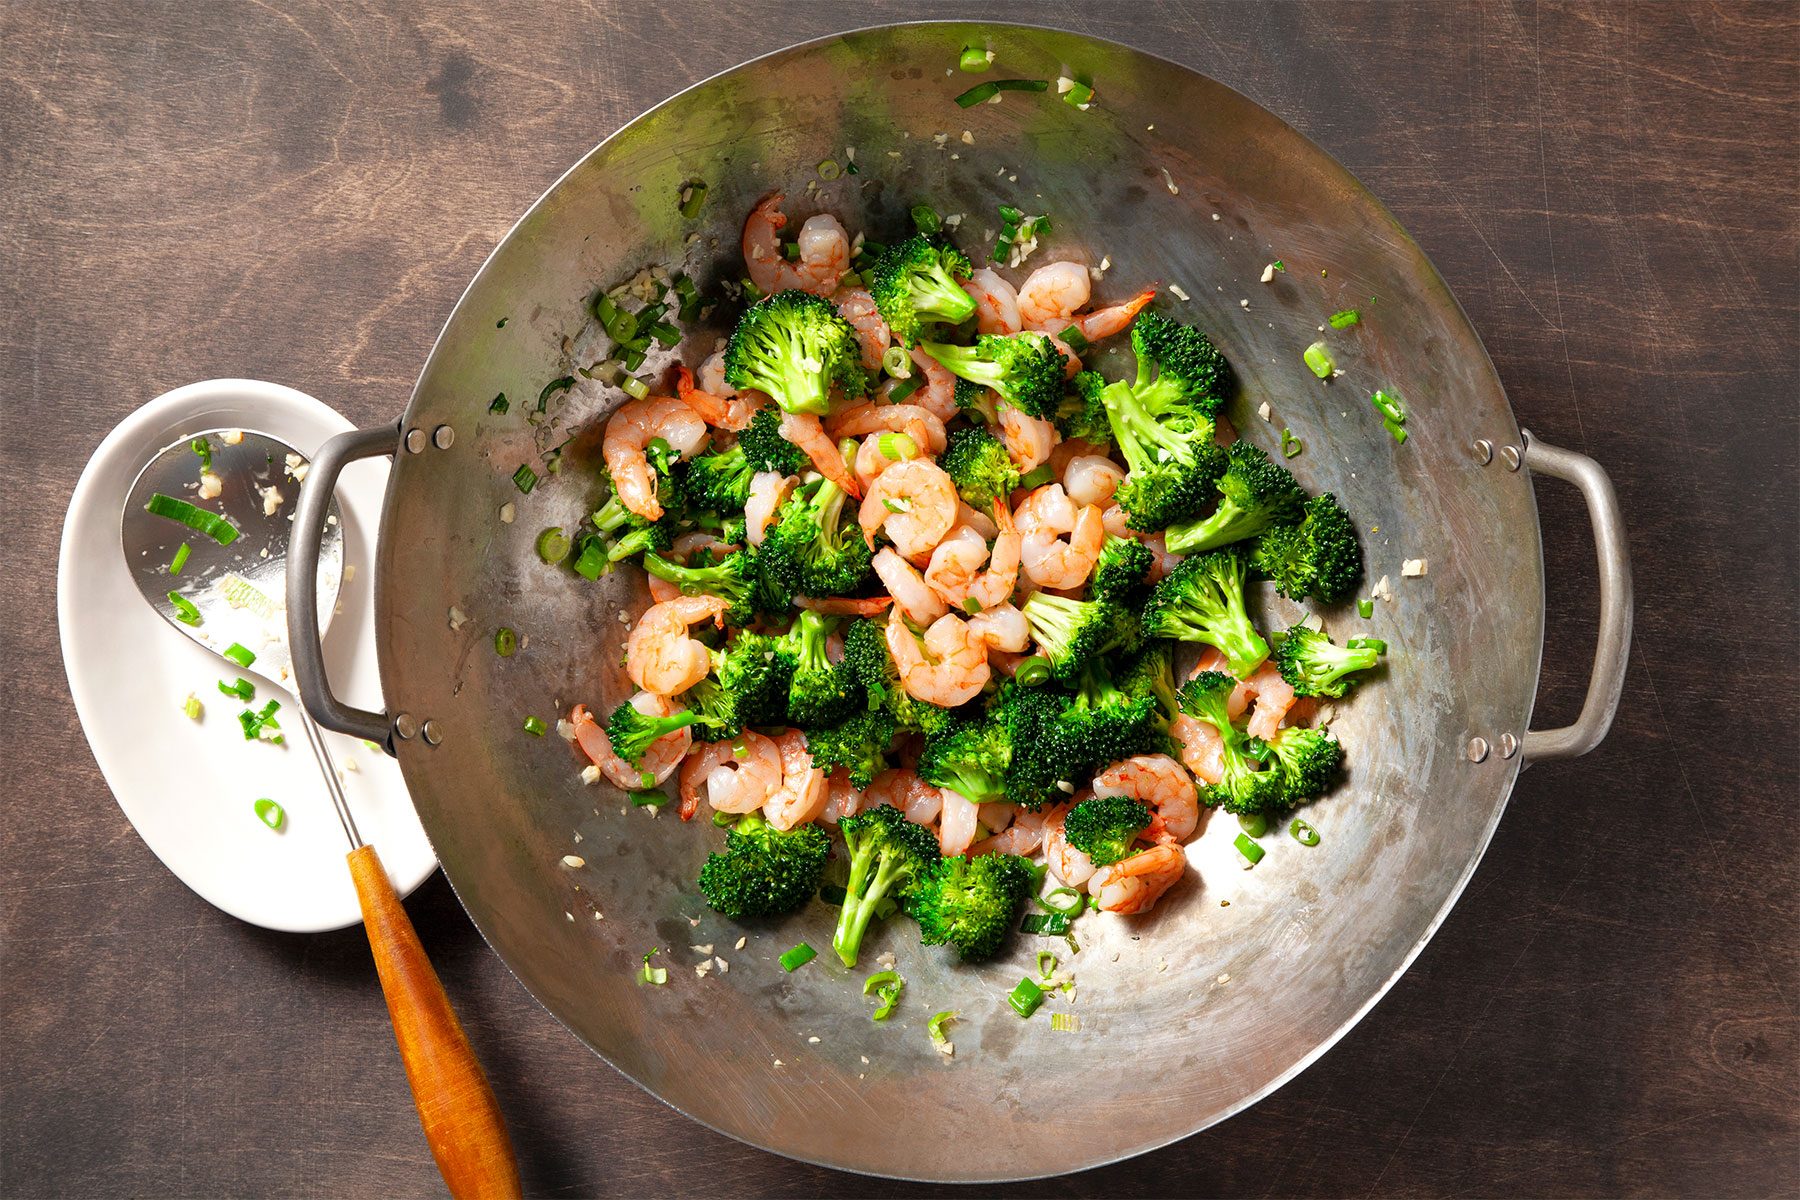 Shrimp added in the wok with broccoli 